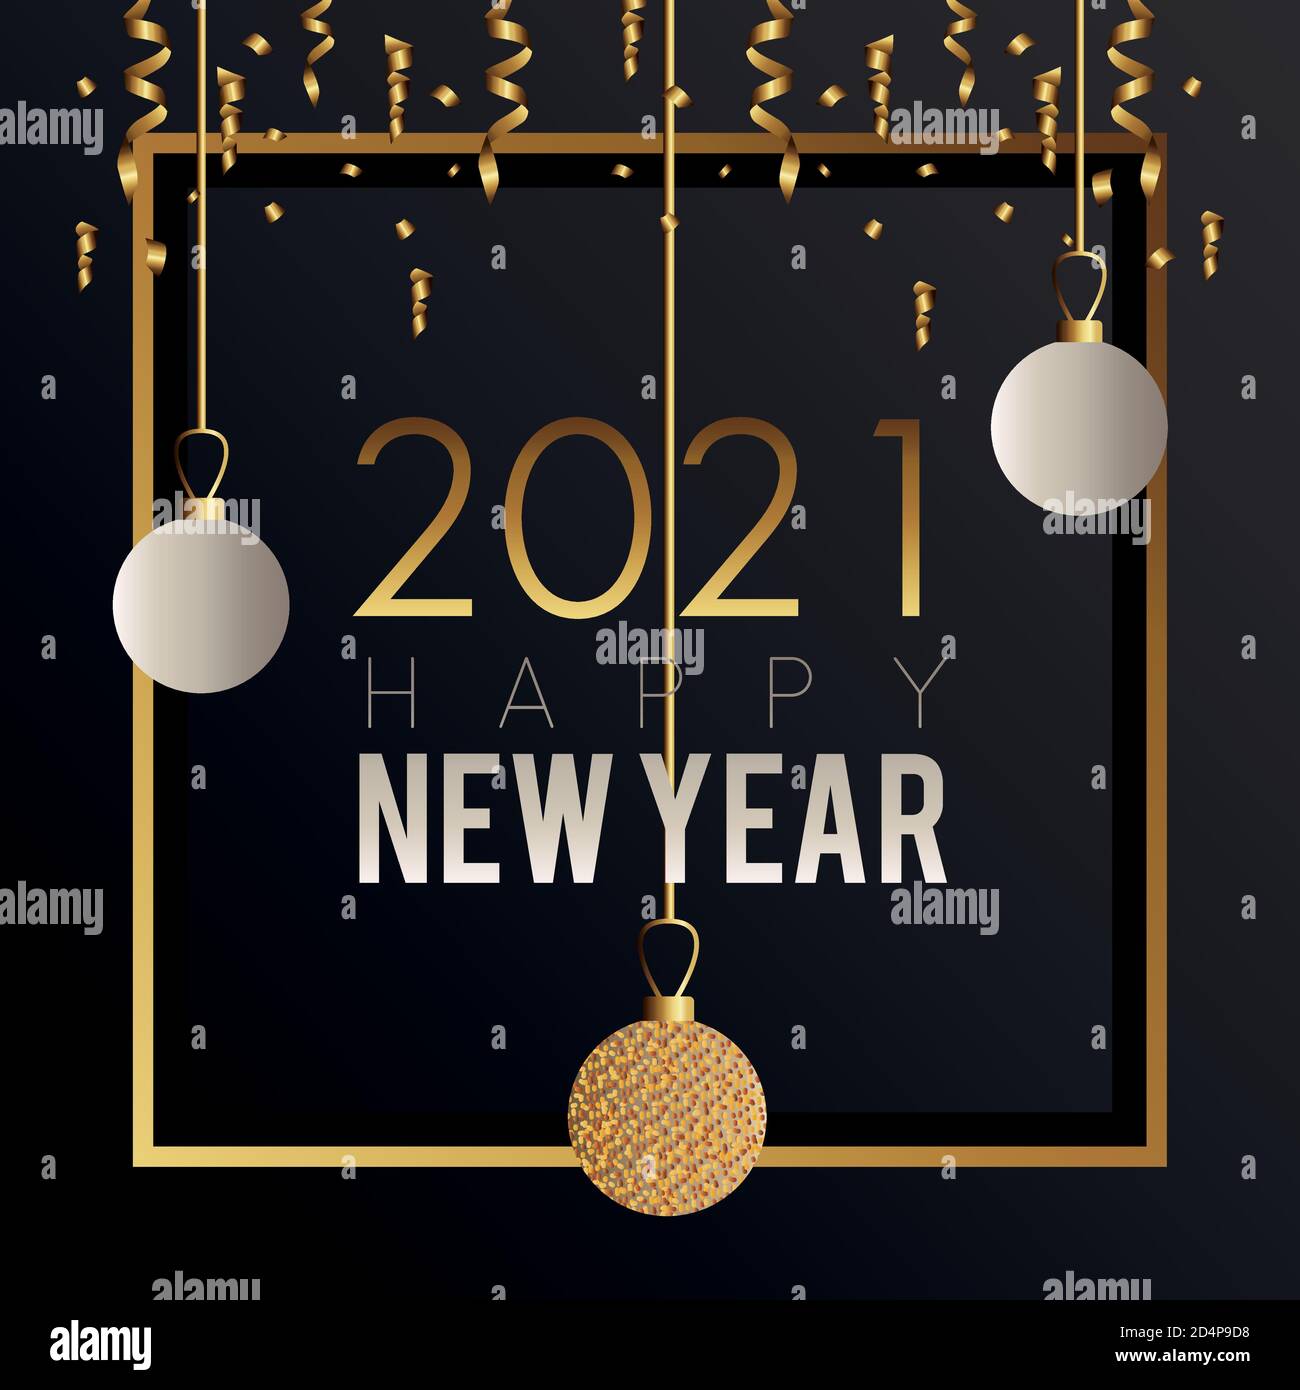 happy new year 2021 lettering with balls hanging square frame vector illustration design Stock Vector